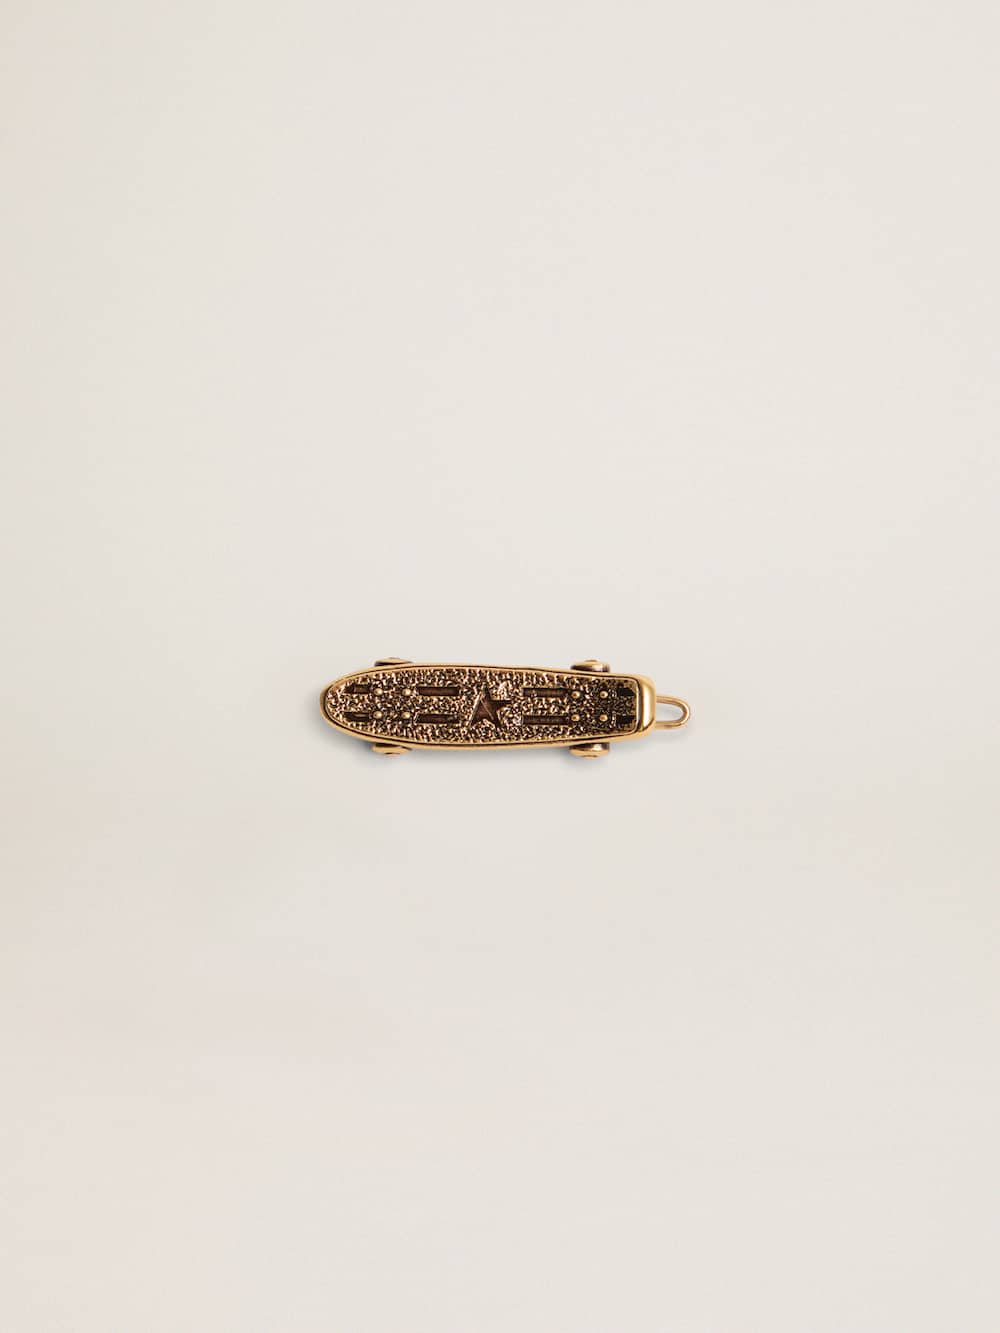 Golden Goose - Men's lace accessory in old gold color in the shape of a skateboard in 